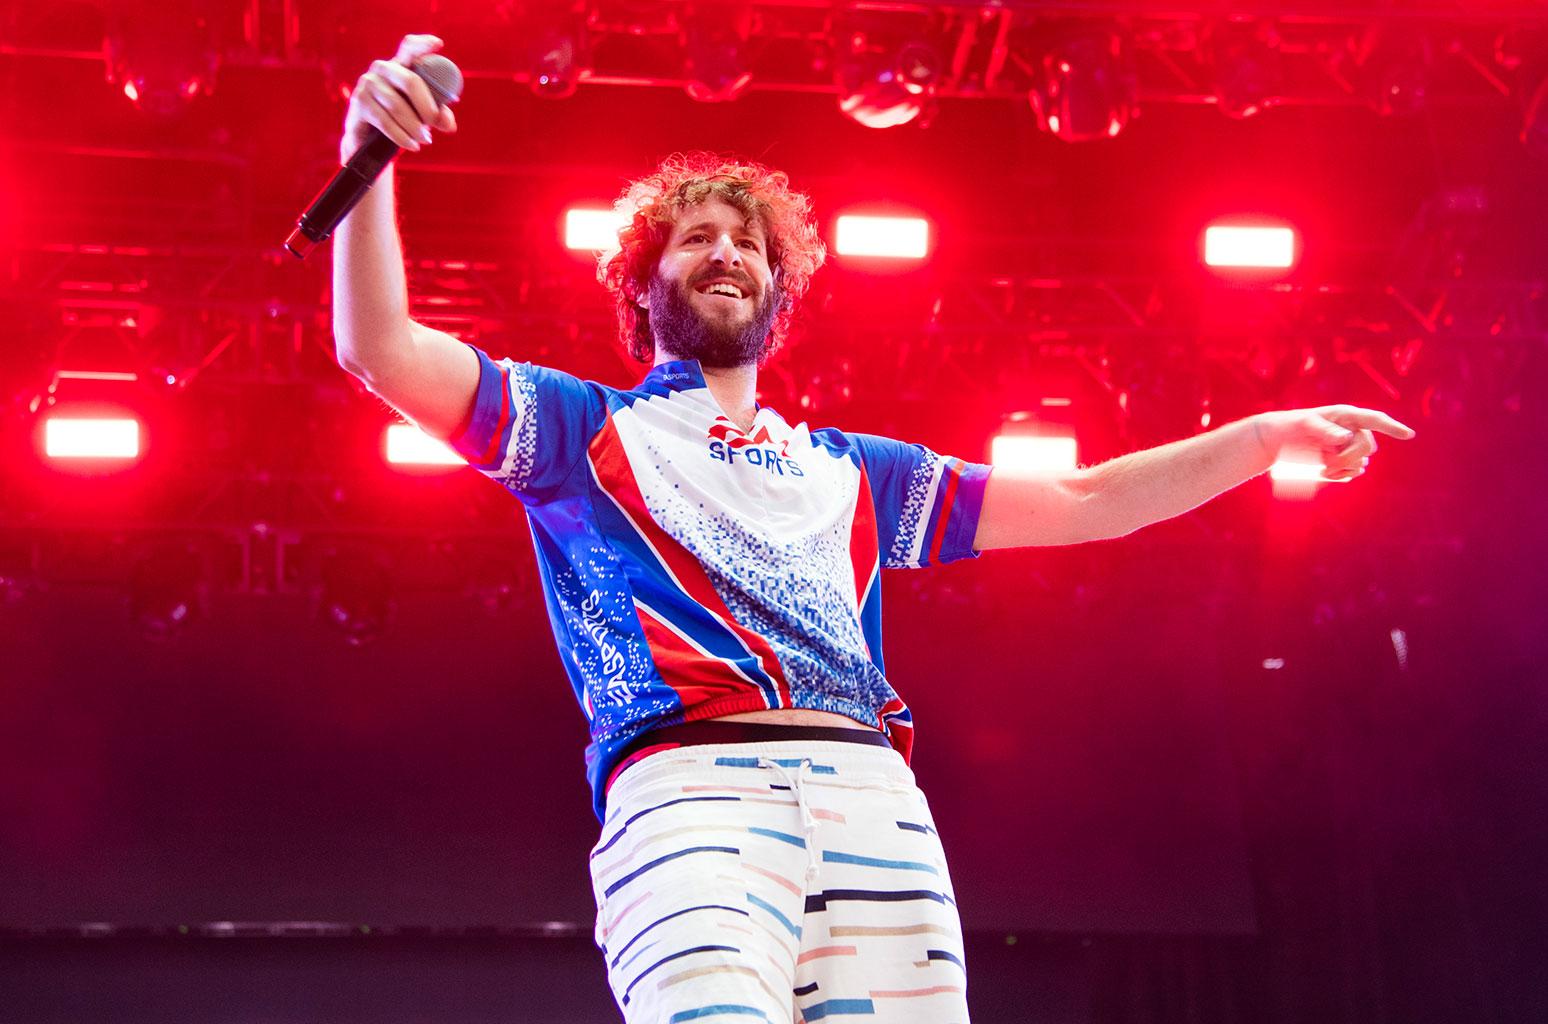 Lil Dicky Previews Star Studded Animated 'Earth' Video On 'Ellen